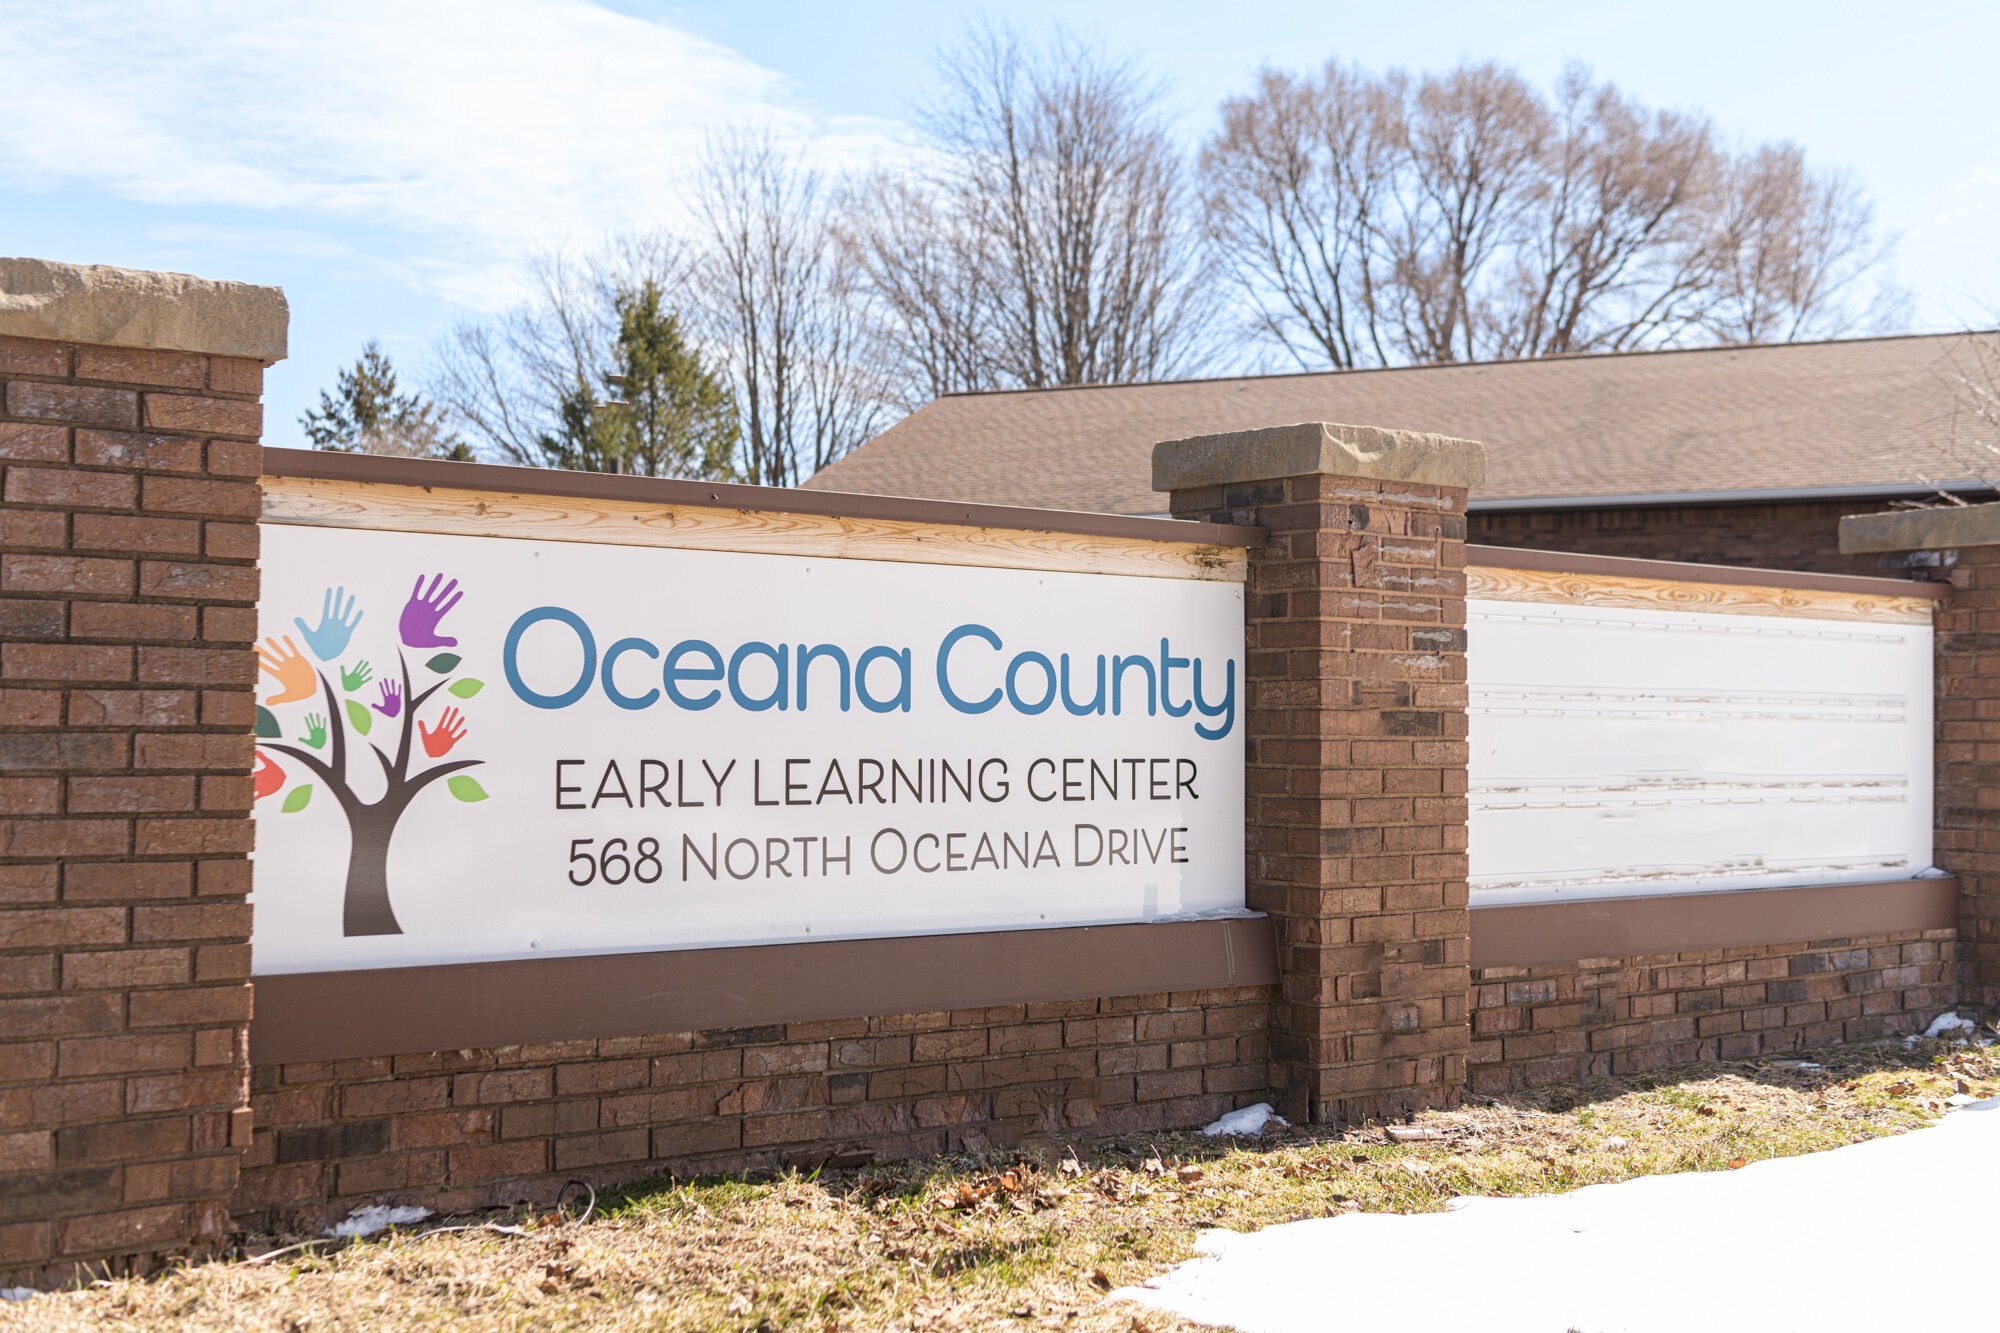 The Community Foundation for Oceana County also contributed to the creation of this daycare. 